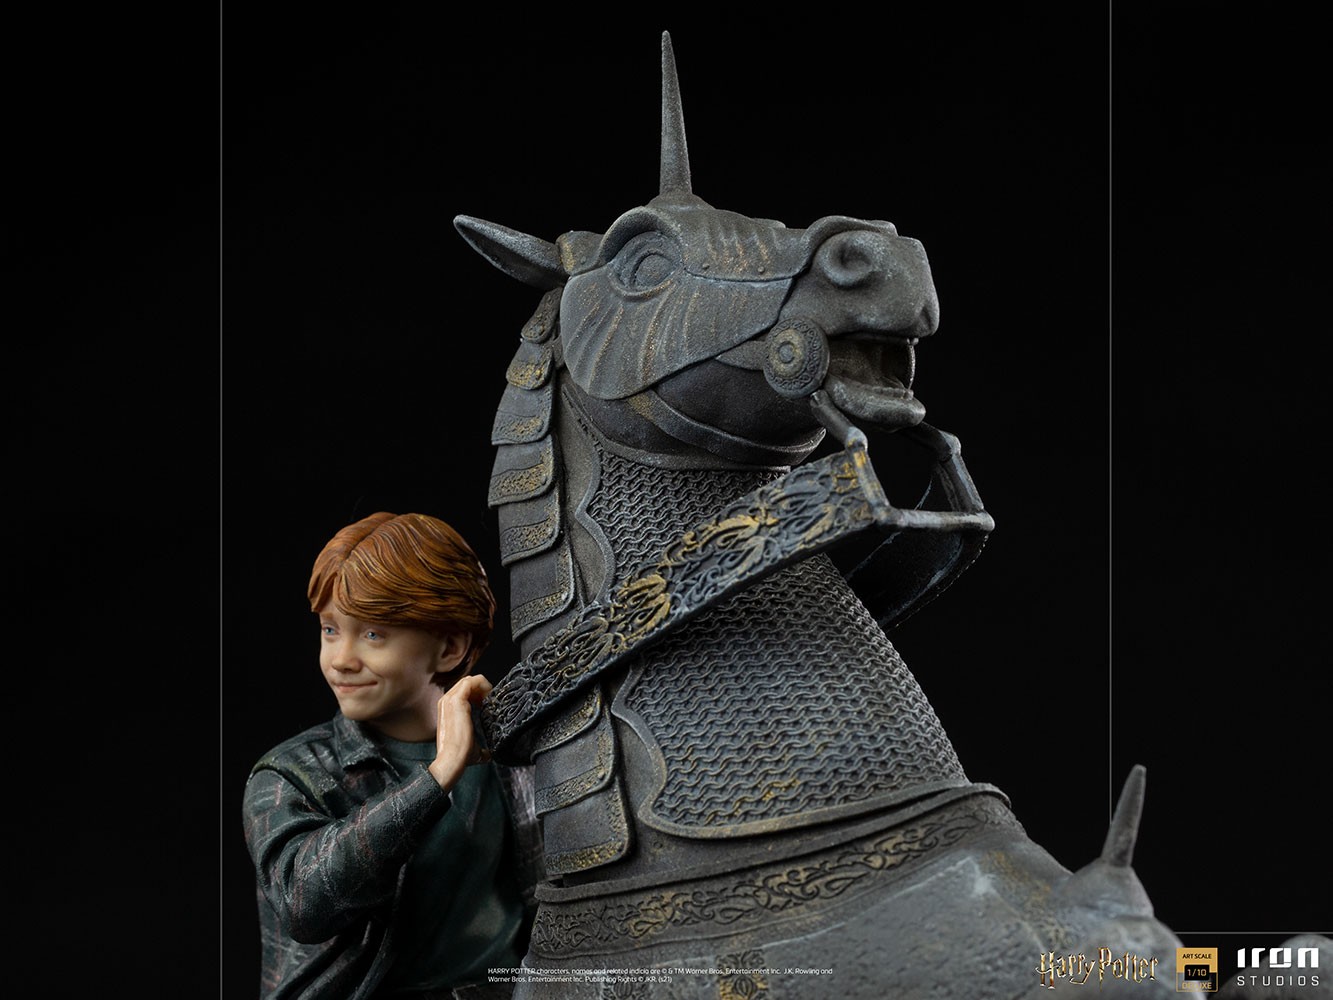 Ron Weasley at the Wizard Chess Deluxe